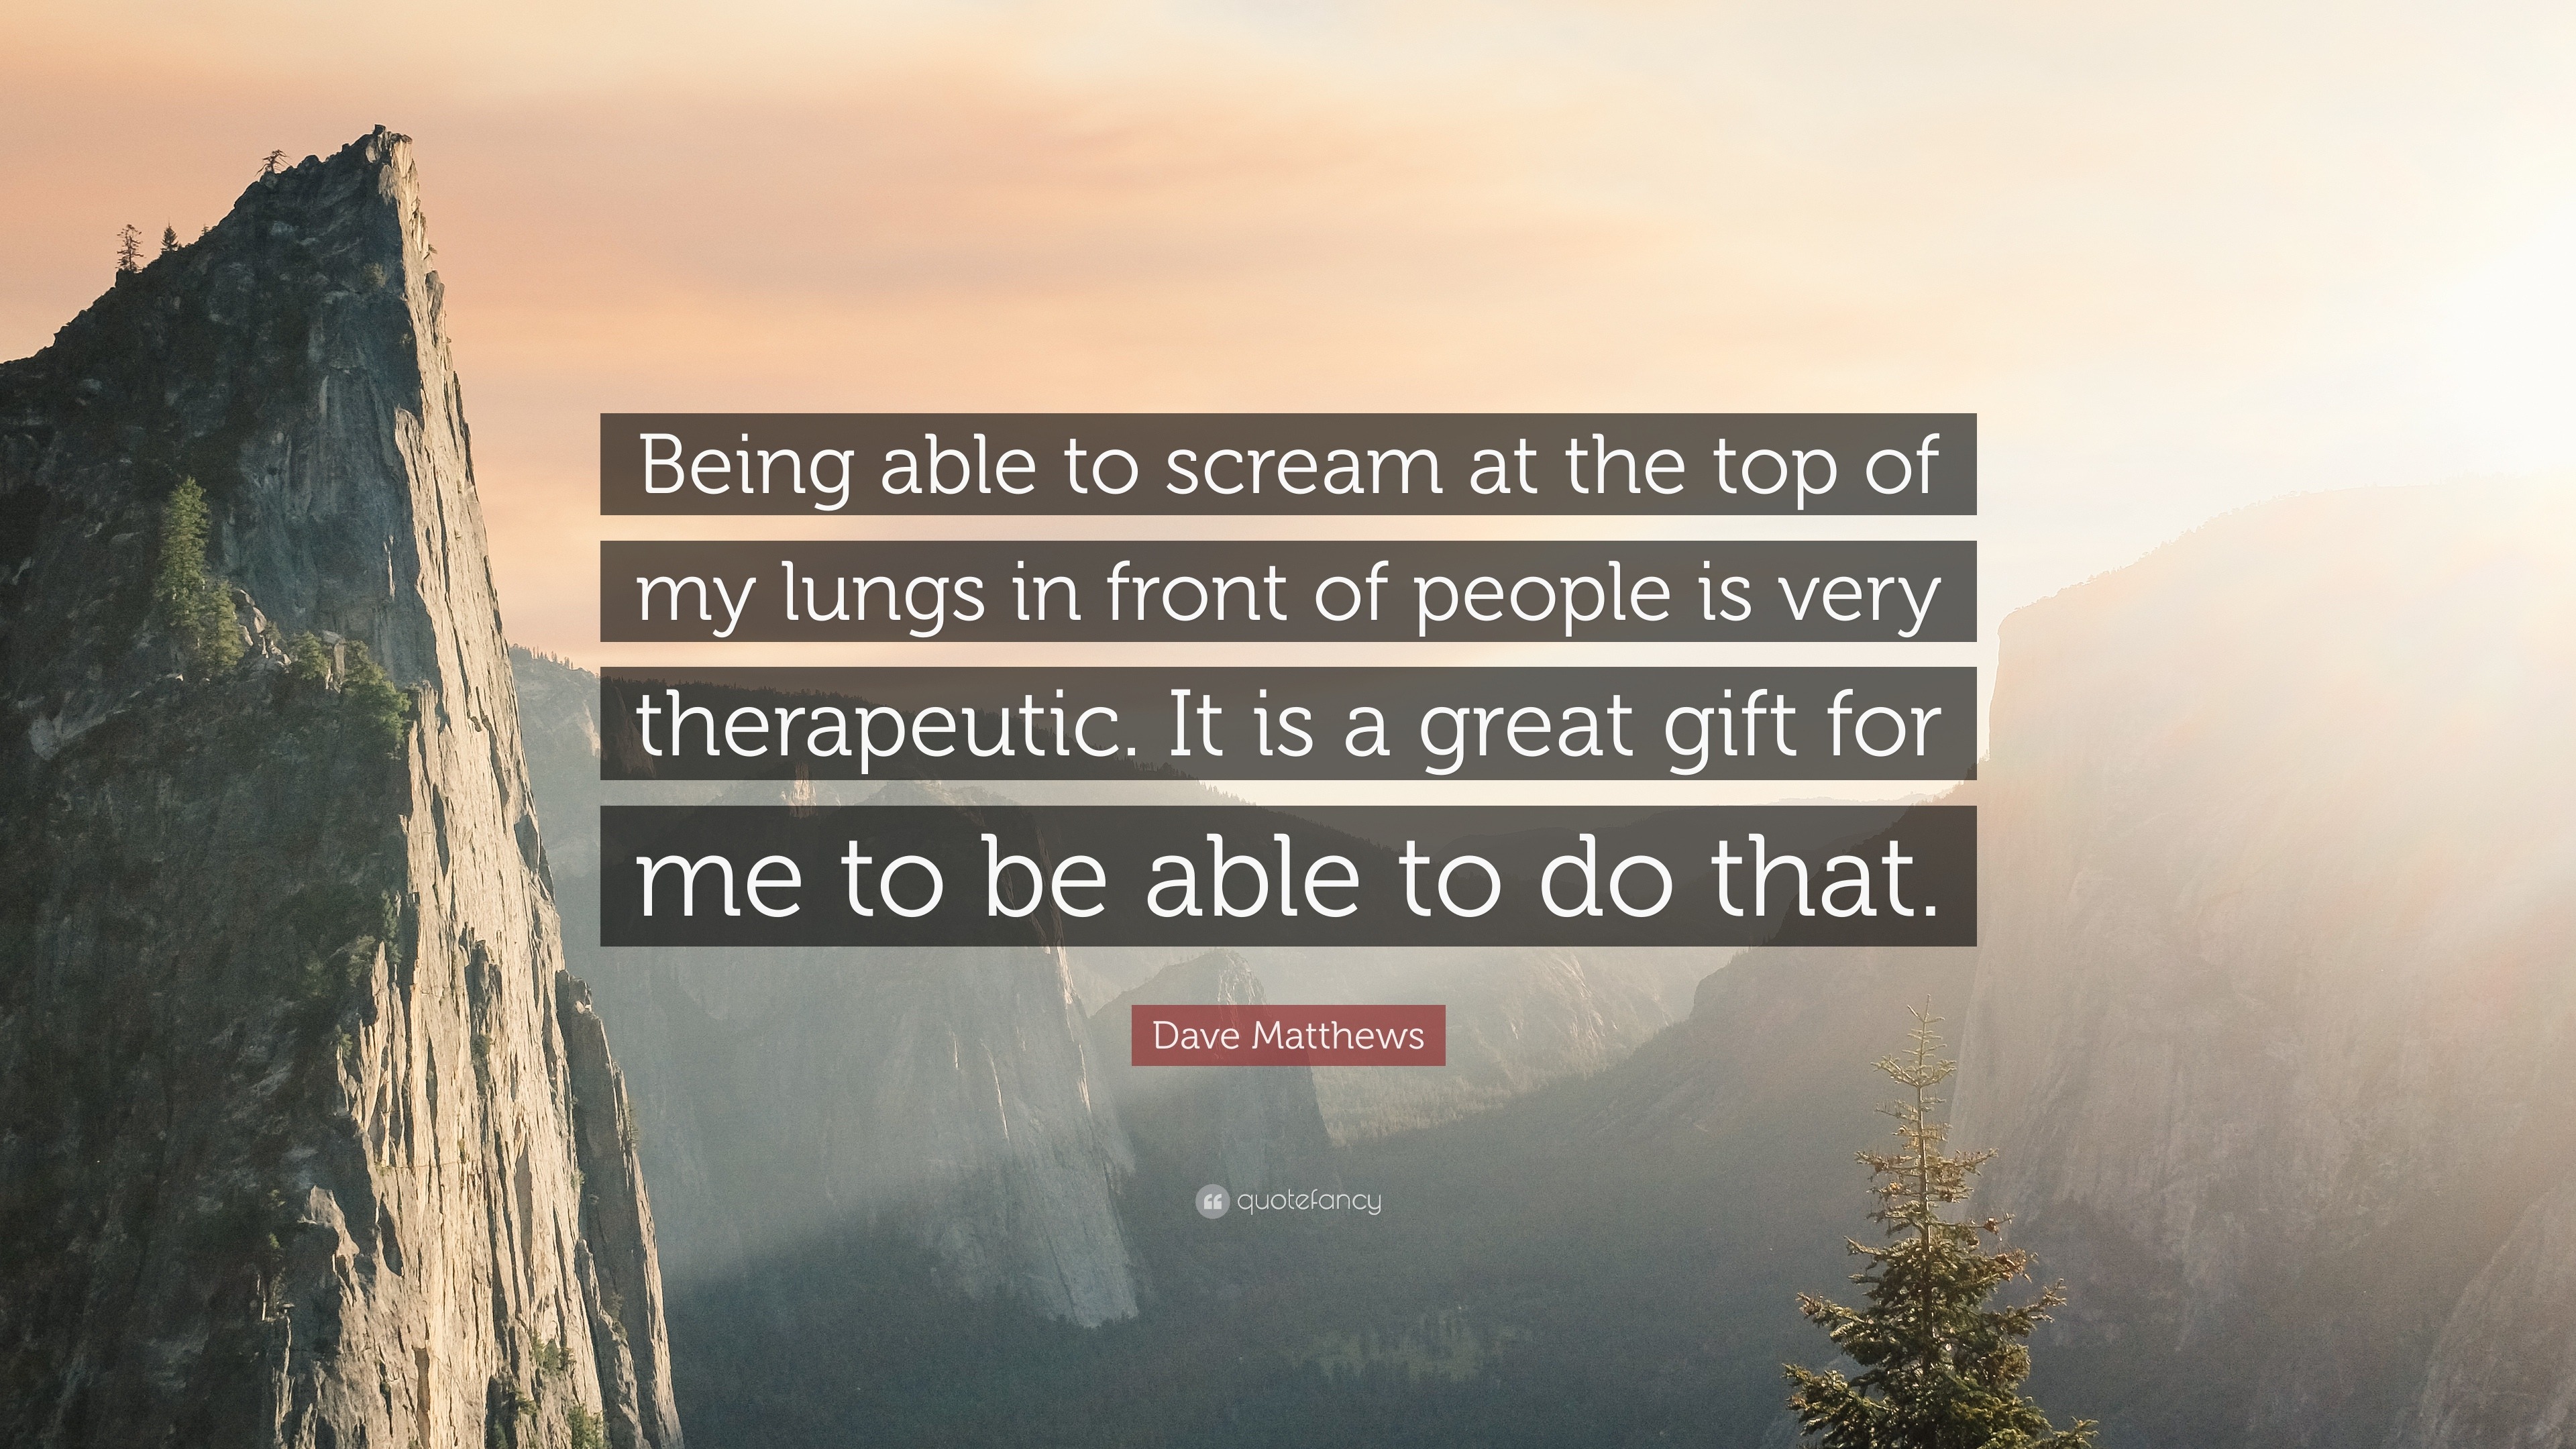 Dave Matthews Quote: “Being able to scream at the top of my lungs in front of people is therapeutic. It a great gift for me to be